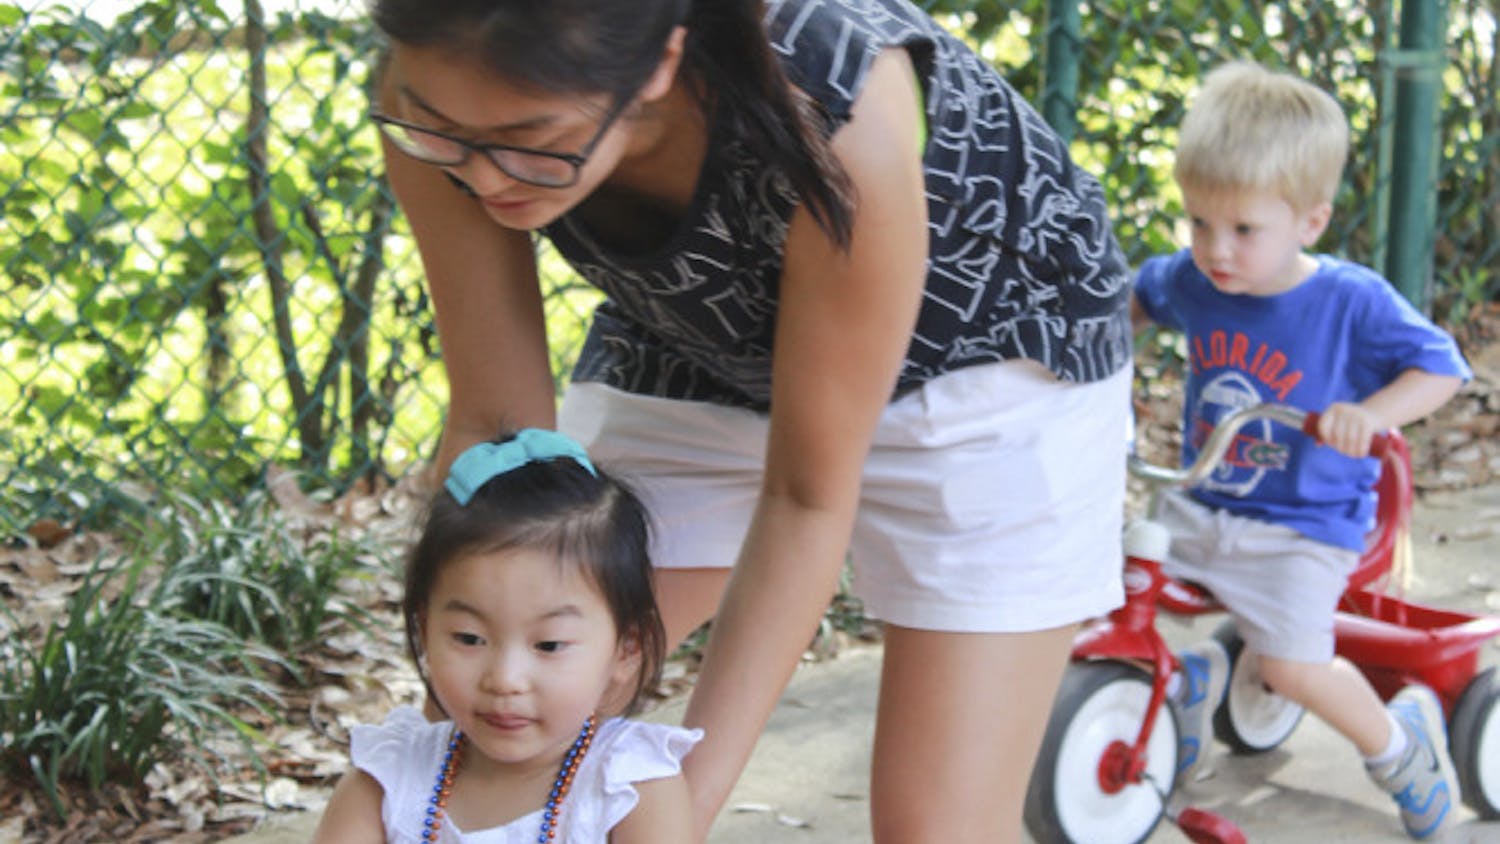 Former UF PhD student Soon Hye Yang, 34, pushes her 3-year-old daughter, Isu Yoon, on a tricycle at the Baby Gator daycare center on Nov. 5, 2015. Baby Gator’s request for additional funding was denied, and without it, student parents like Yang may be cut from the program.